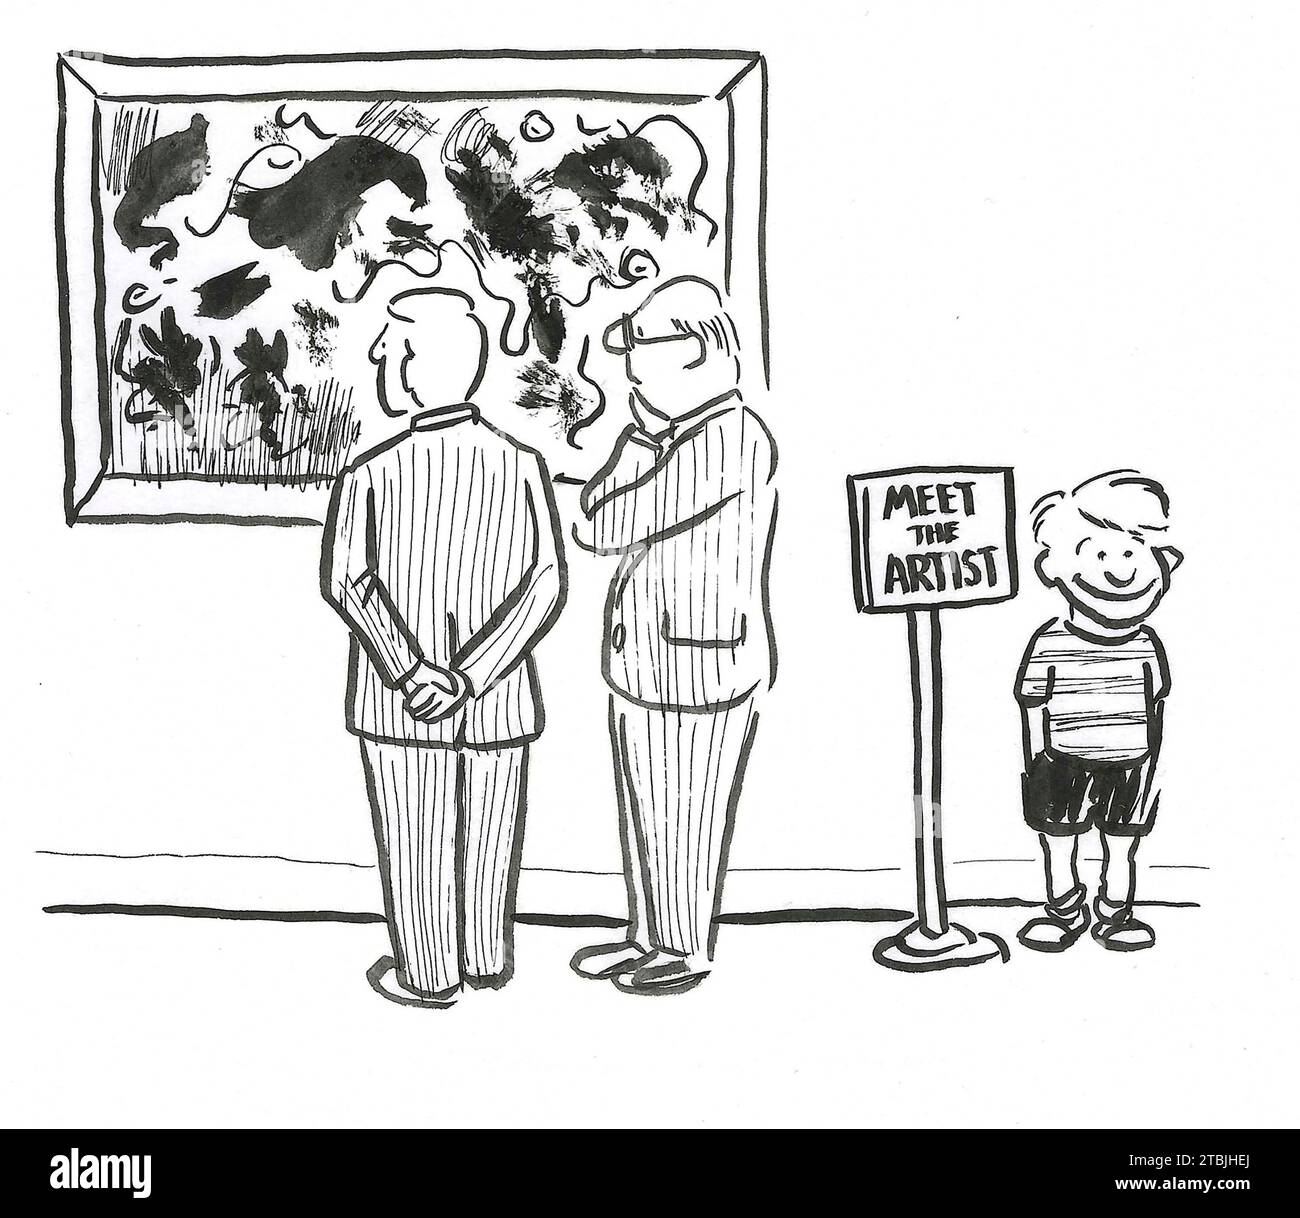 B&W illustration of a young boy, the artist, whose work is in an art museum being looked at and admired by adults. Stock Photo